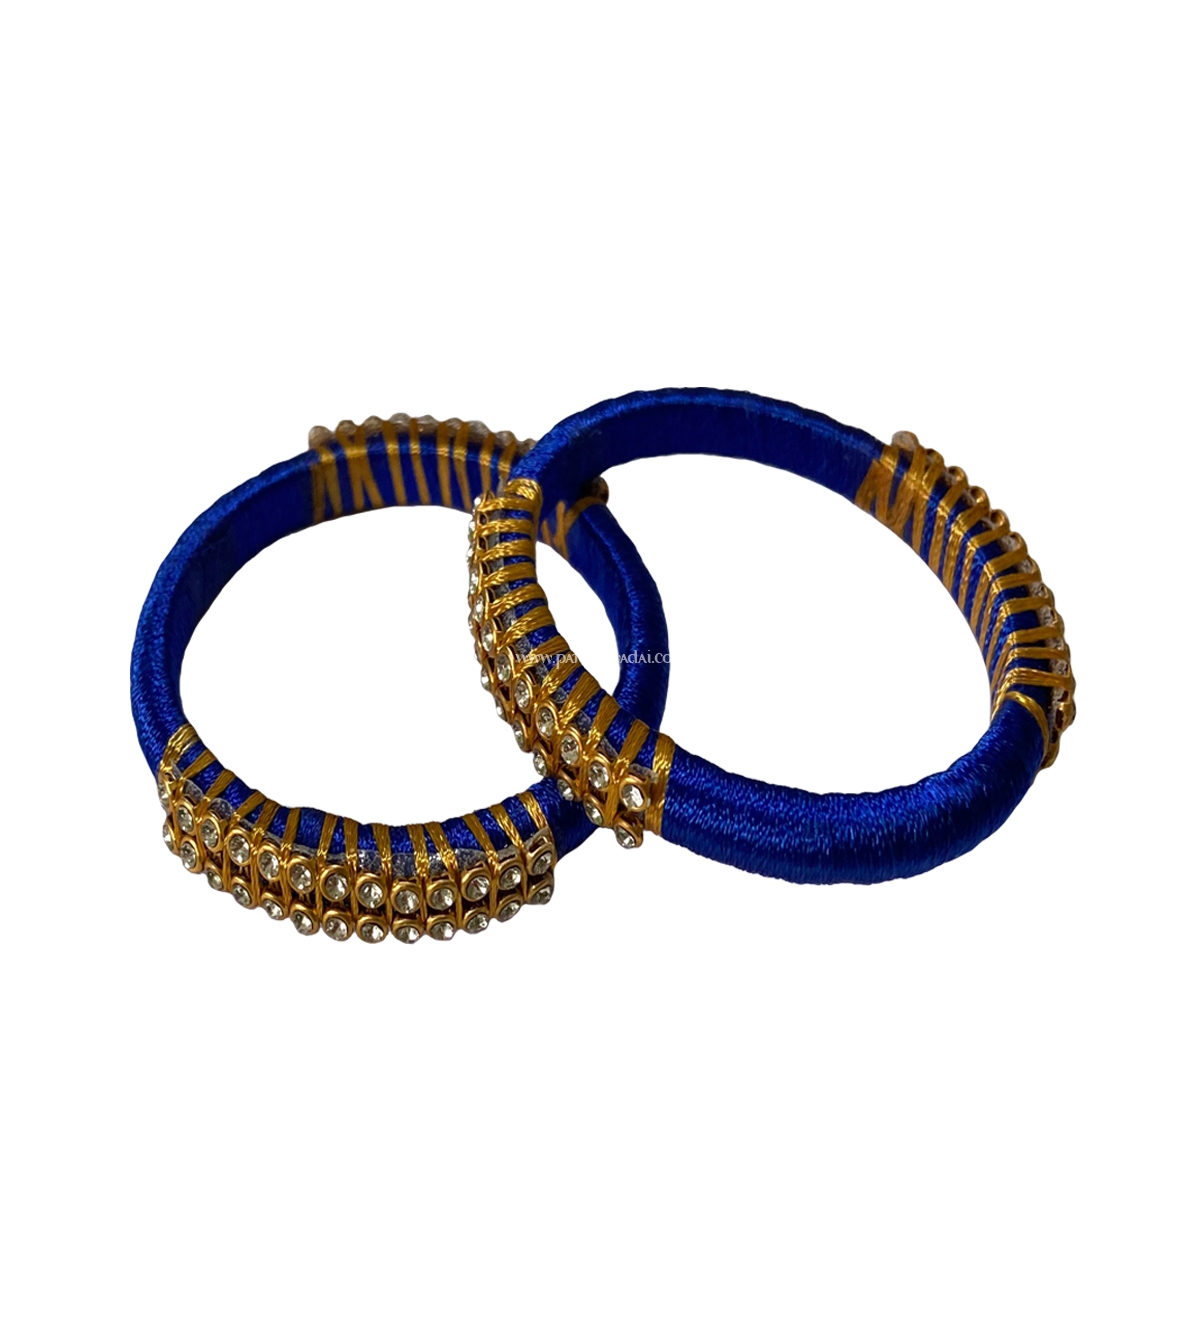 Buy Silk Thread Bangle Blue And Golden, Accessories